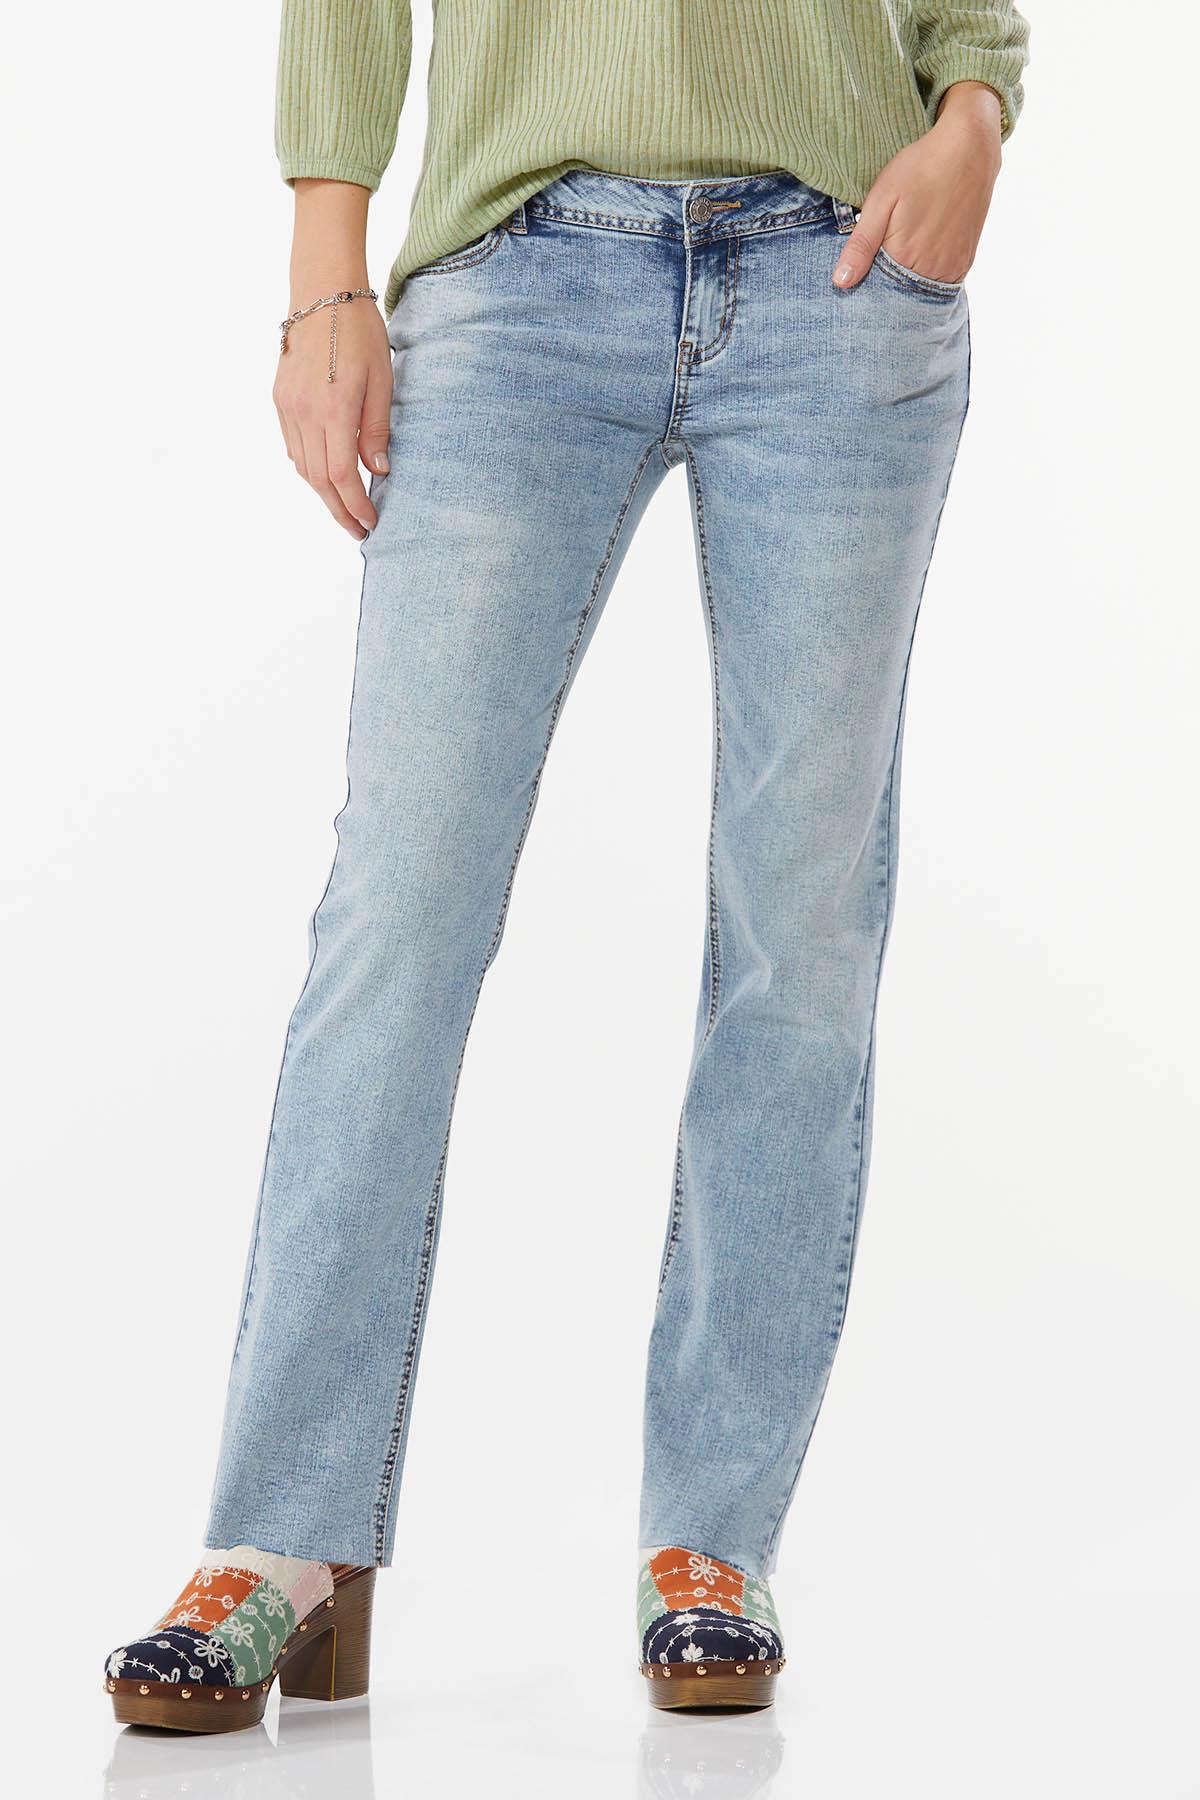 Light Wash Jeans Straight Cato Fashions